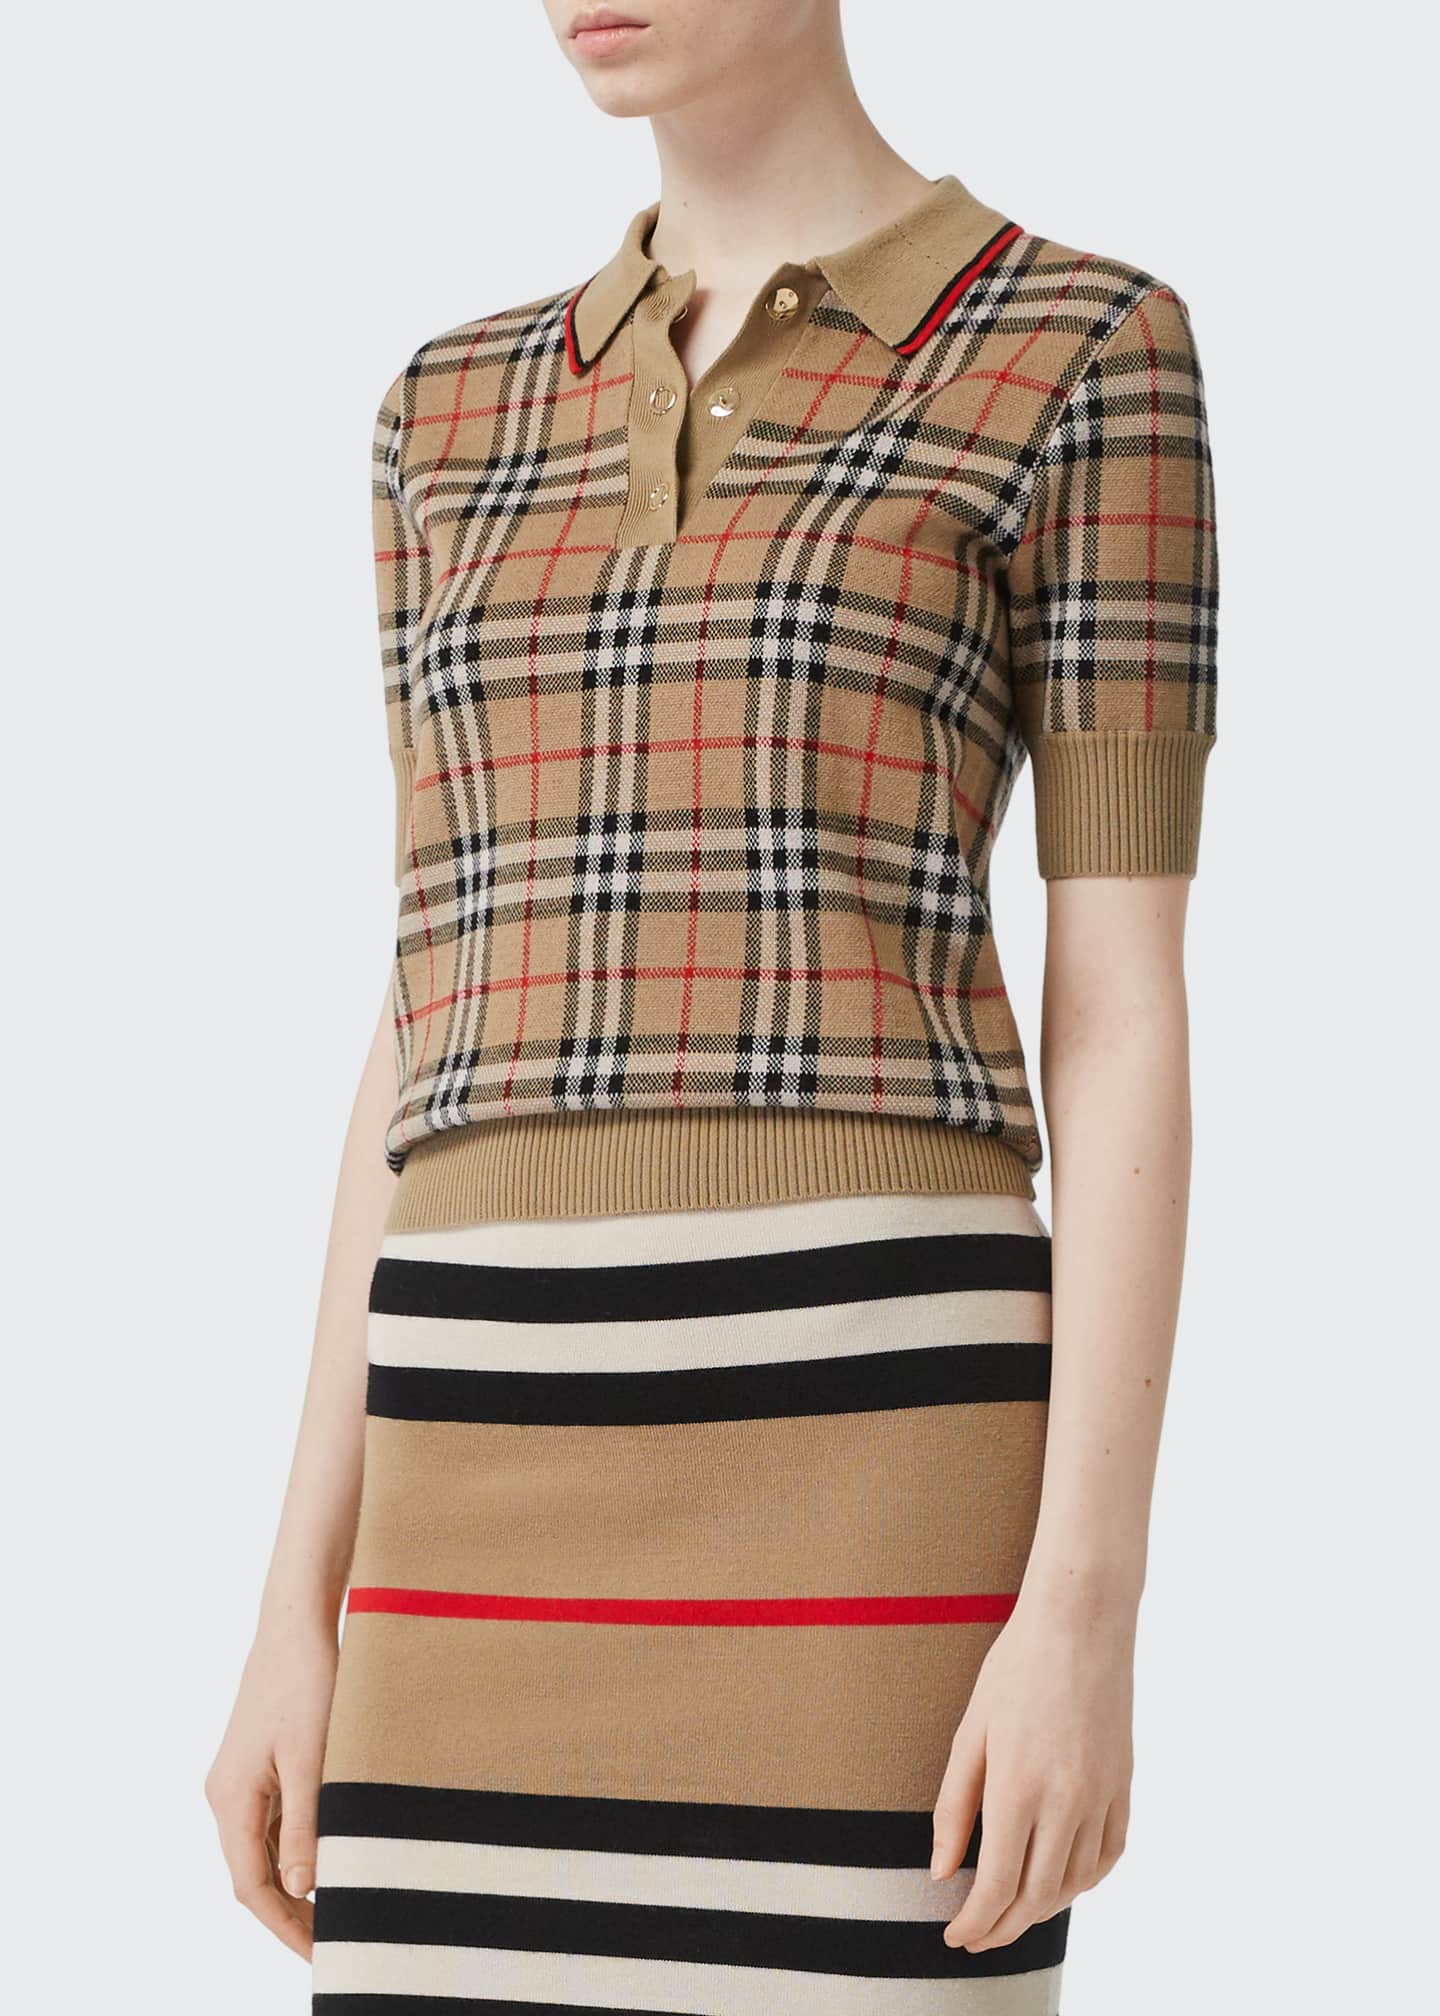 Burberry Chatterton Check Jacquard Knitted Polo - Bergdorf Goodman